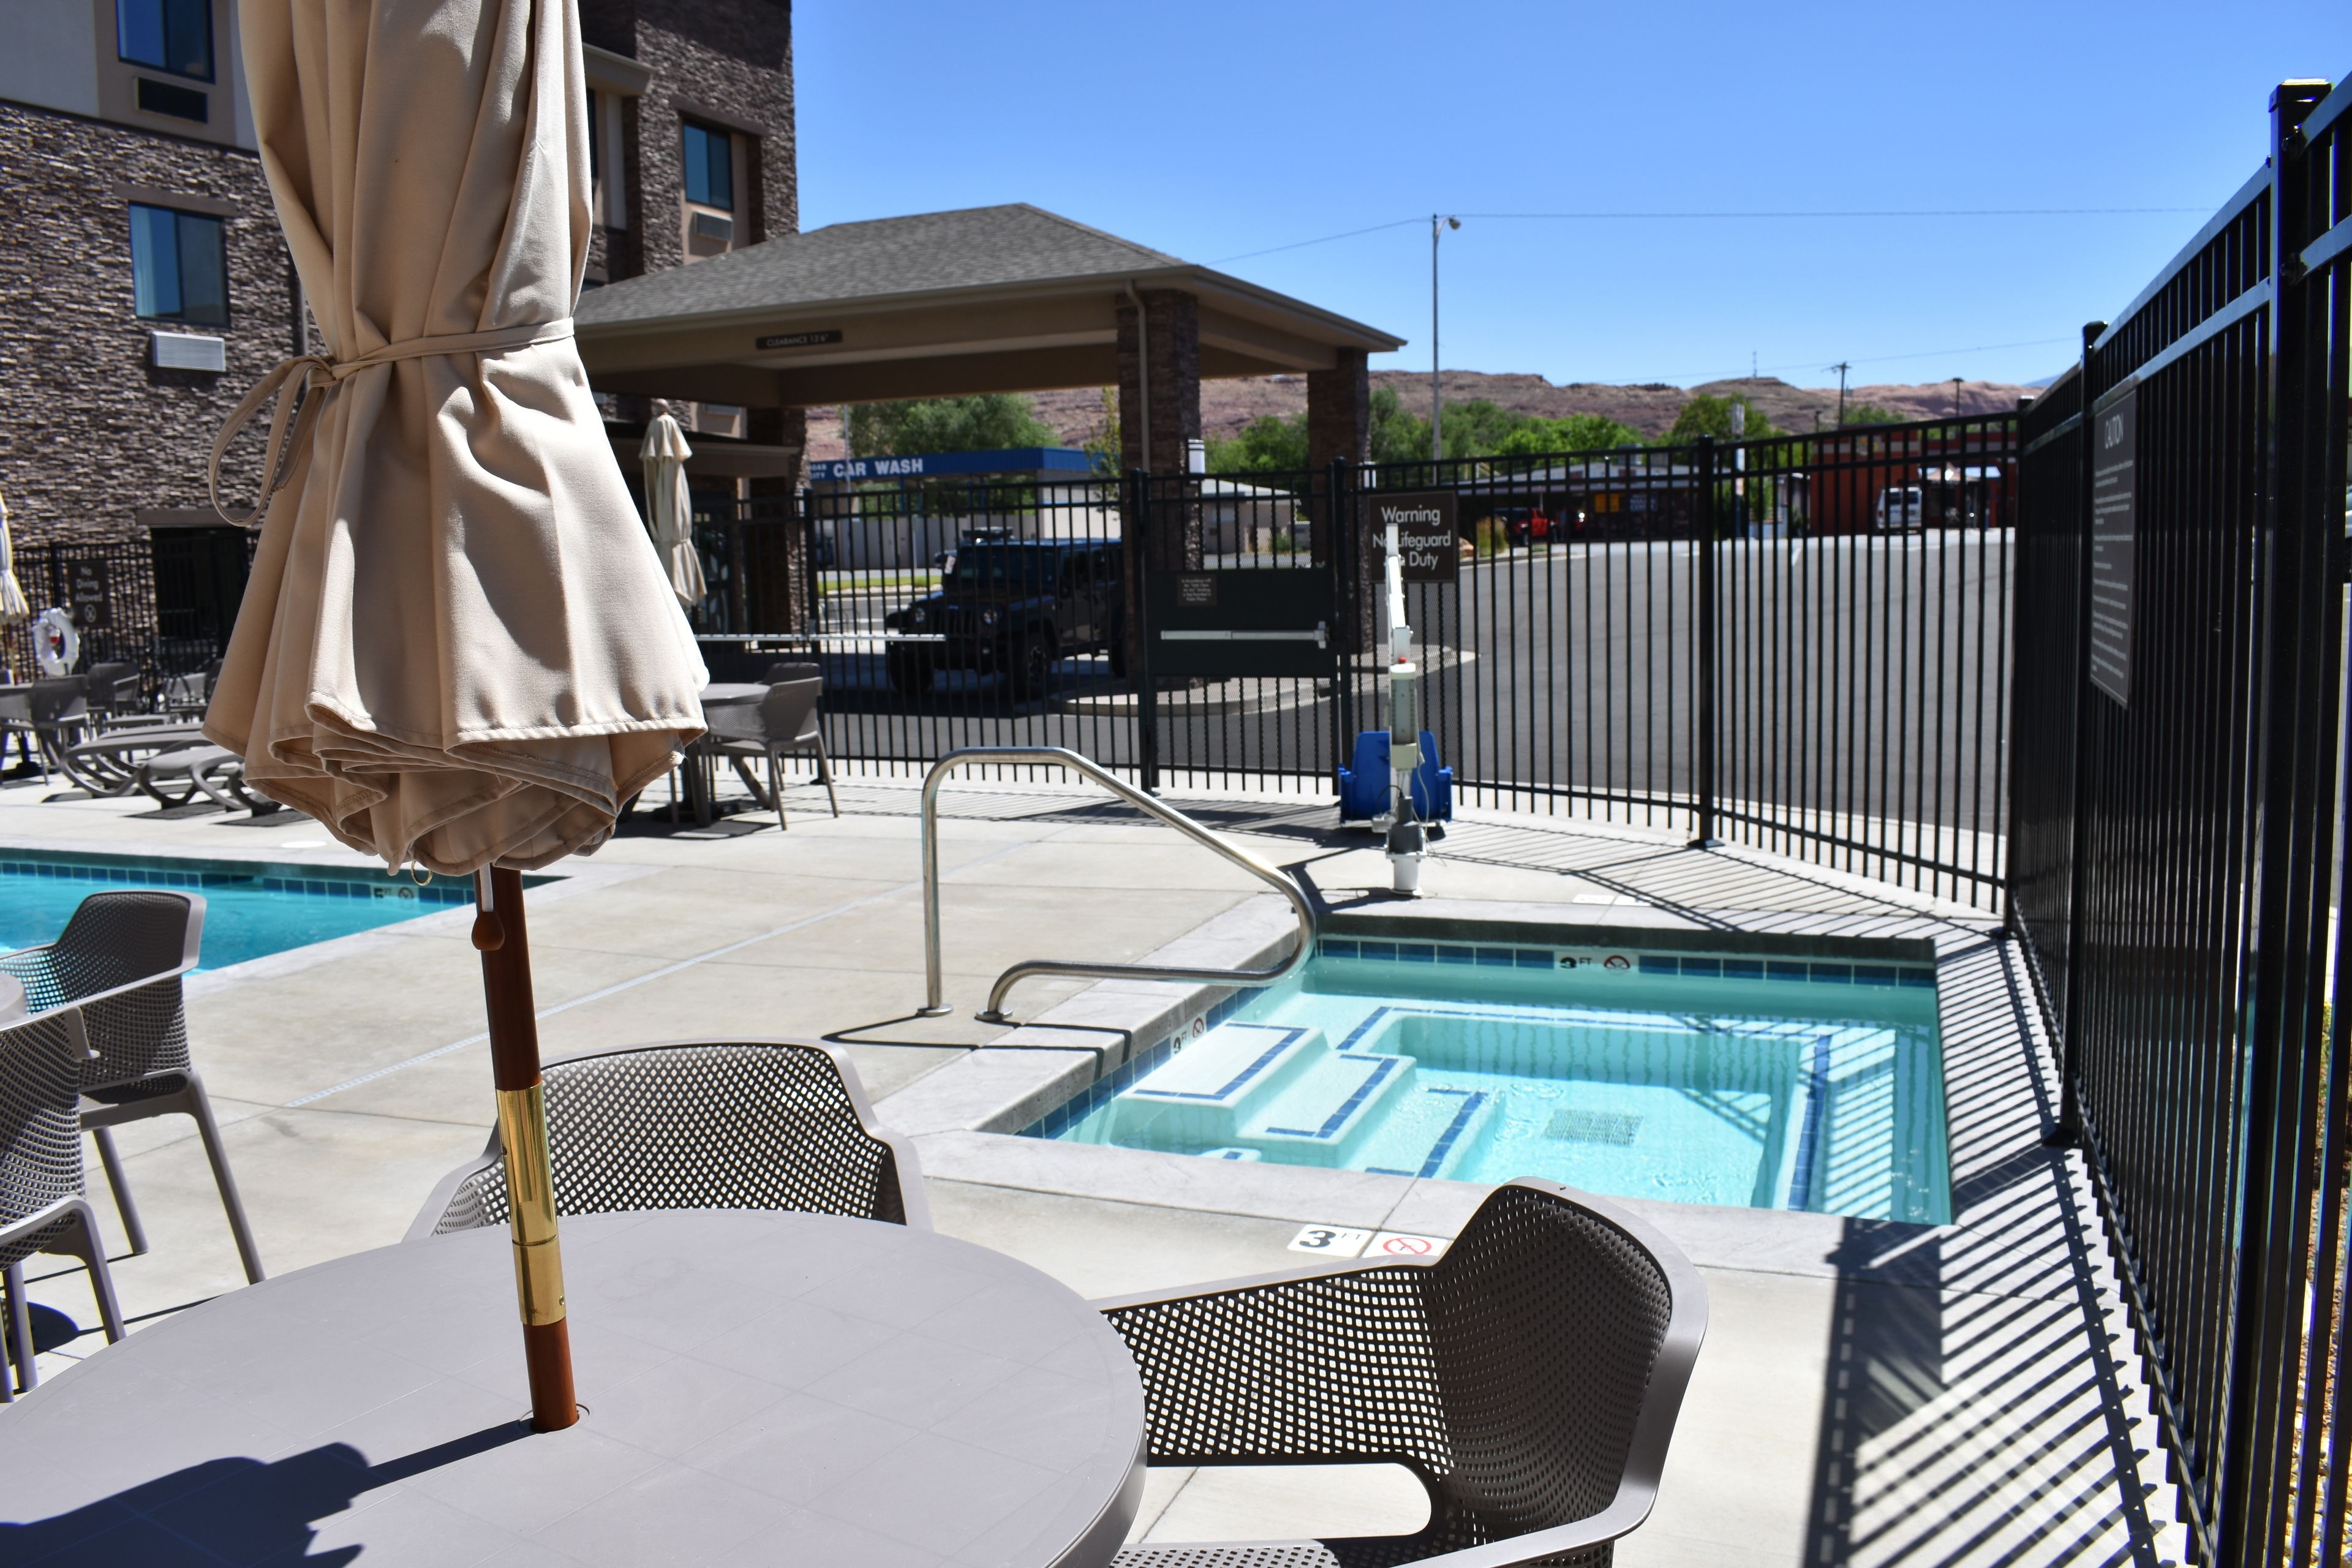 MainStay Suites Moab Near Arches National Park